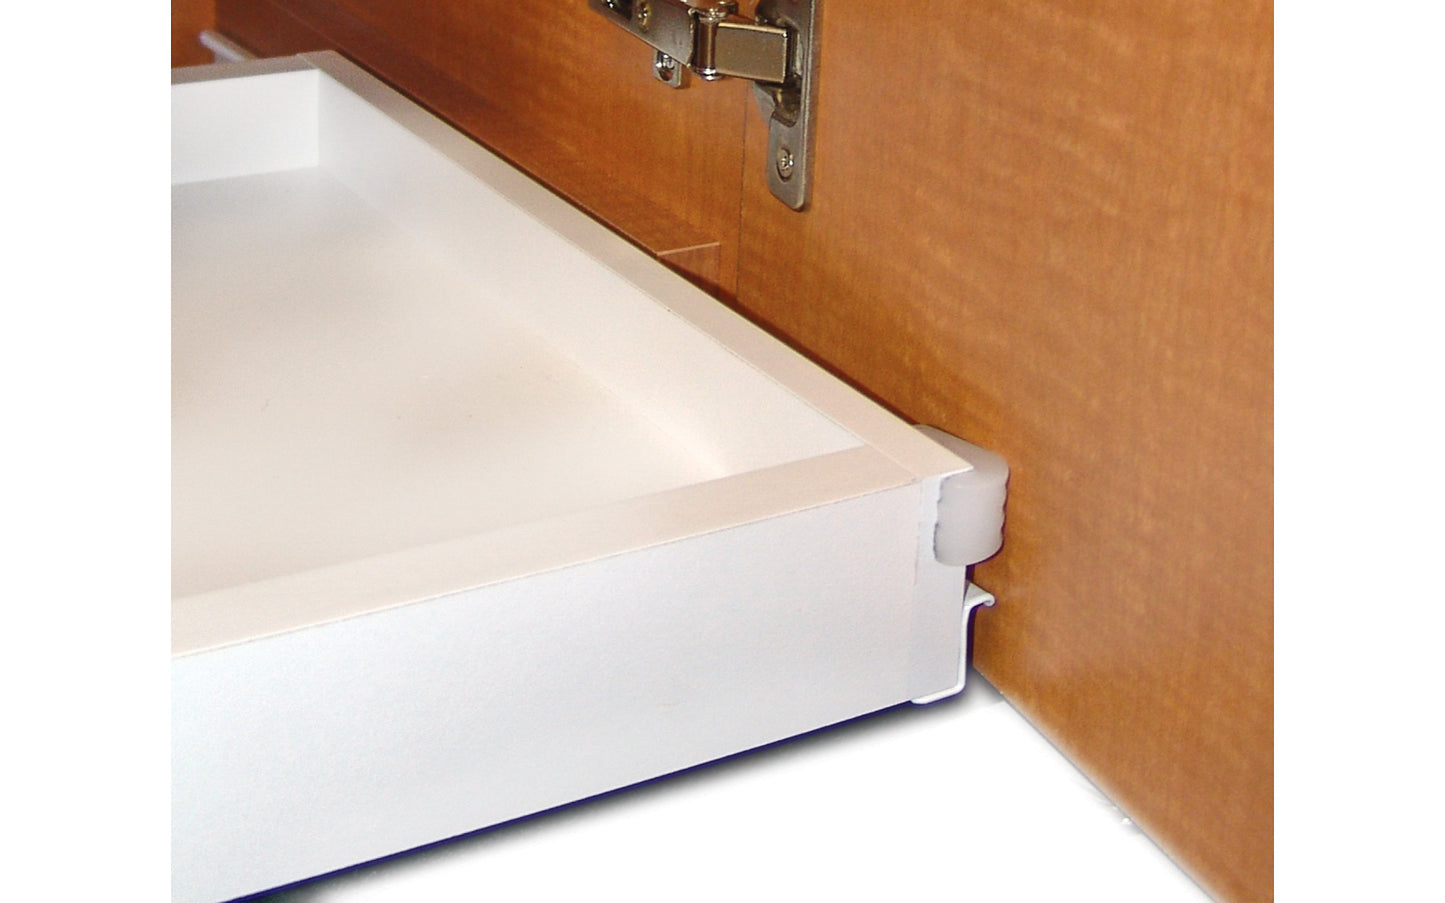 The FastCap Drawer Bumper ~ 10 Pieces protects cabinet doors from unintentional marring from drawer pull-outs. Eliminates drawer guide scratches. Model Fastcap DRAWER BUMPER ~ 663807999559